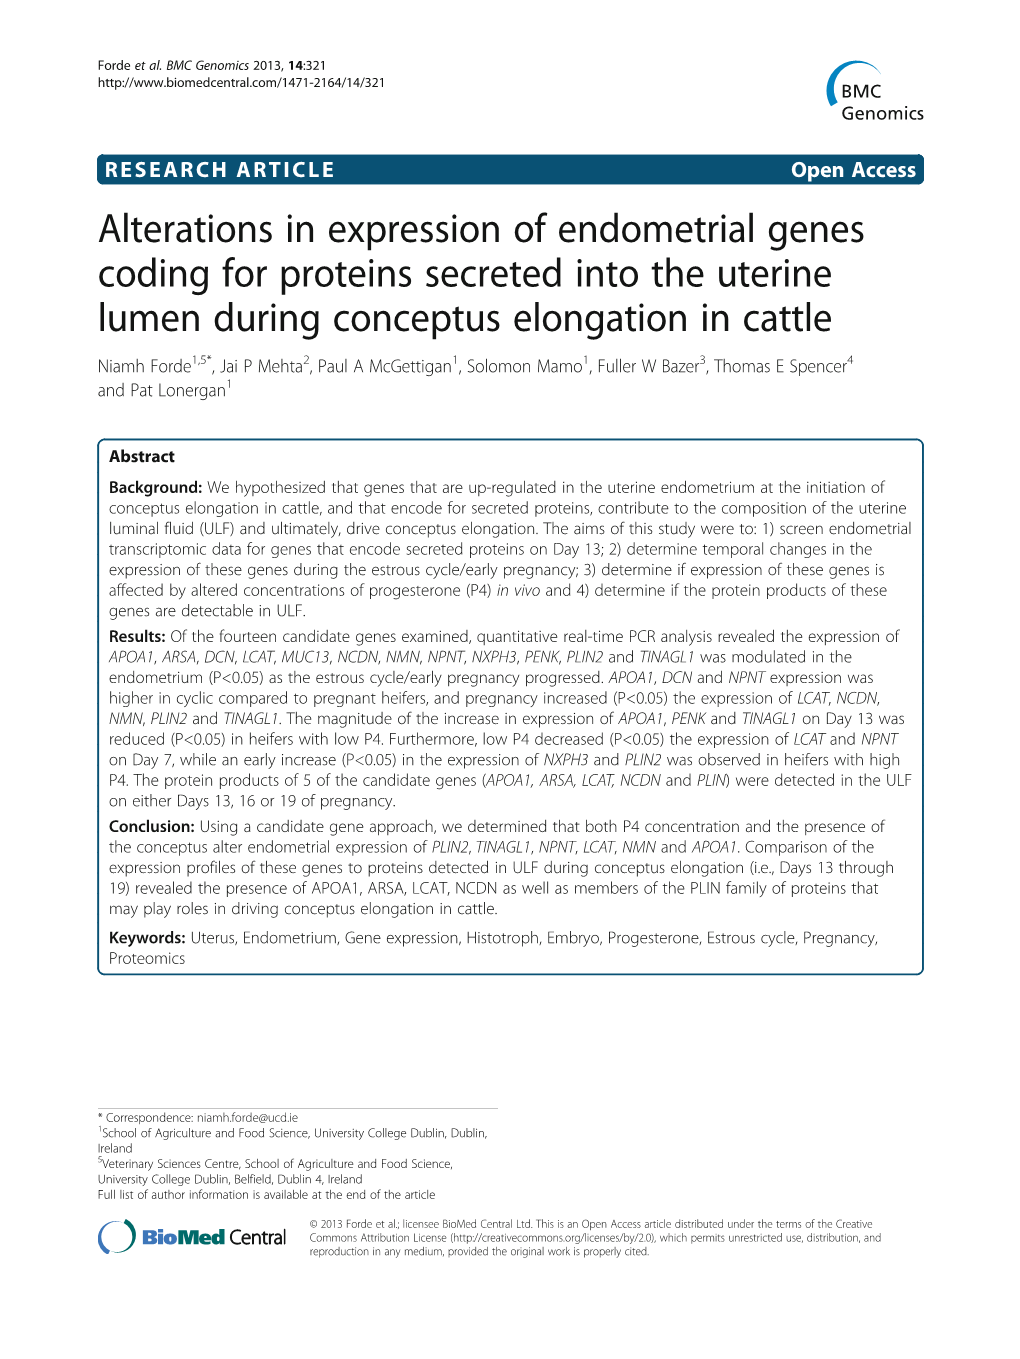 Alterations in Expression of Endometrial Genes Coding for Proteins Secreted Into the Uterine Lumen During Conceptus Elongation I